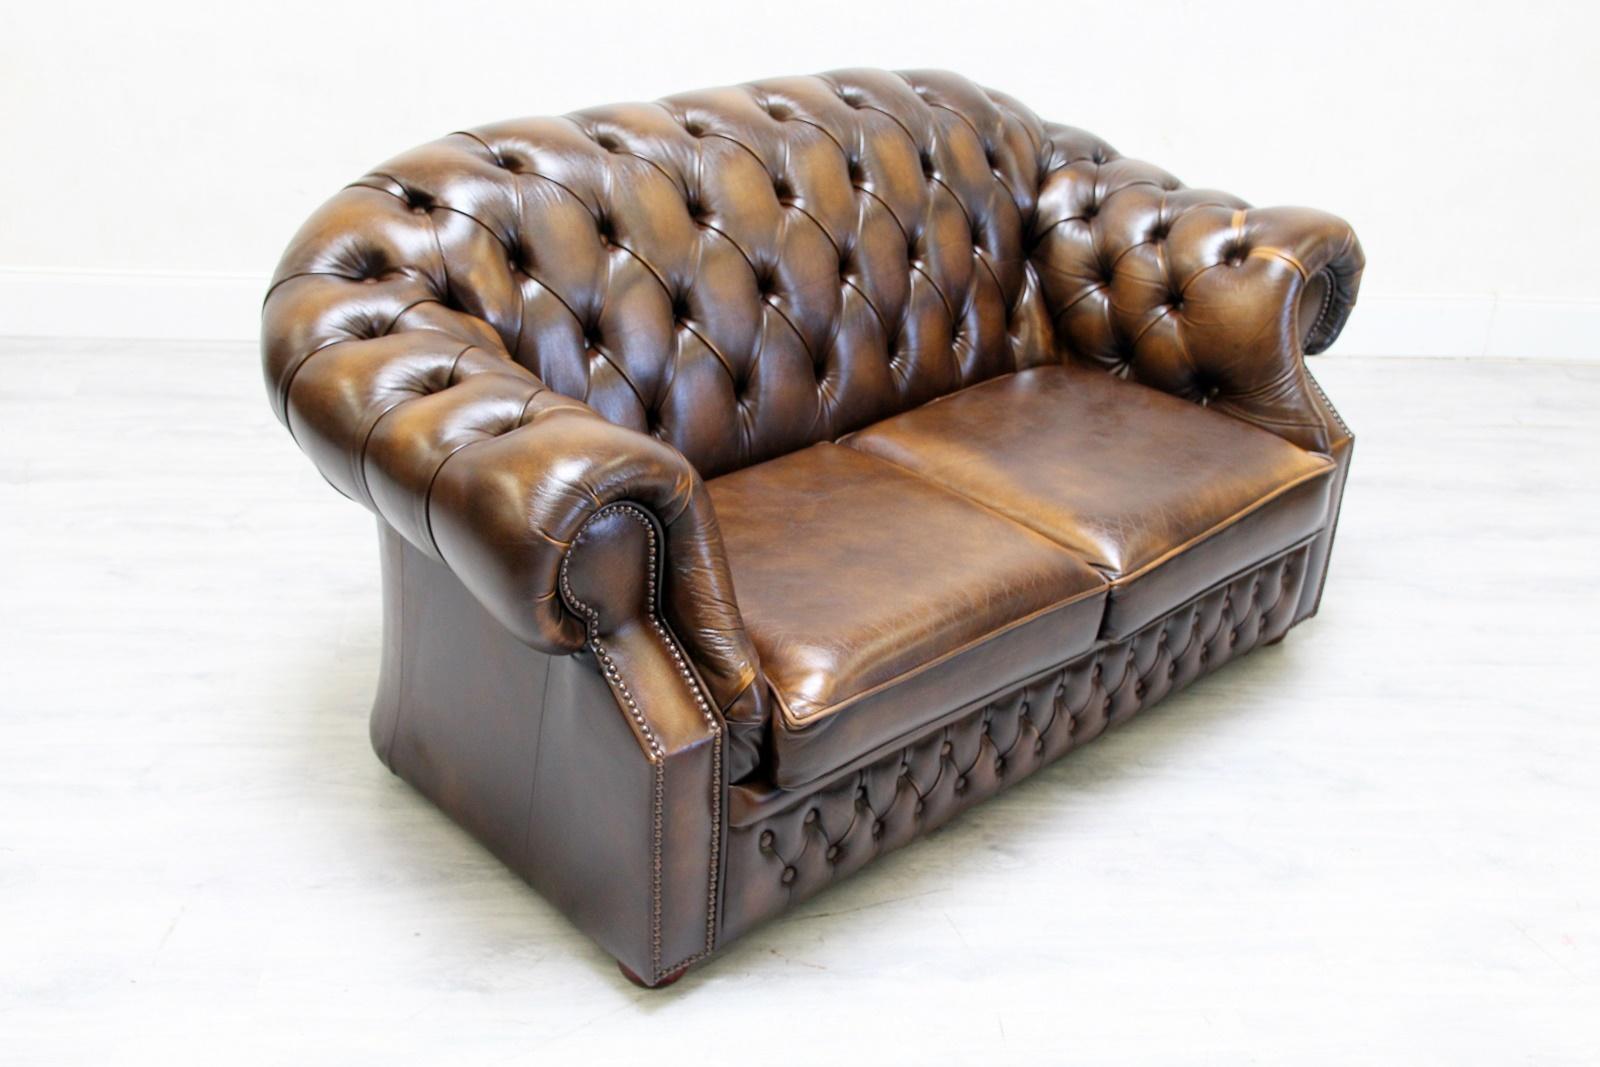 Chesterfield Sofa Leather Antique Vintage Couch English Real Leather For Sale 2